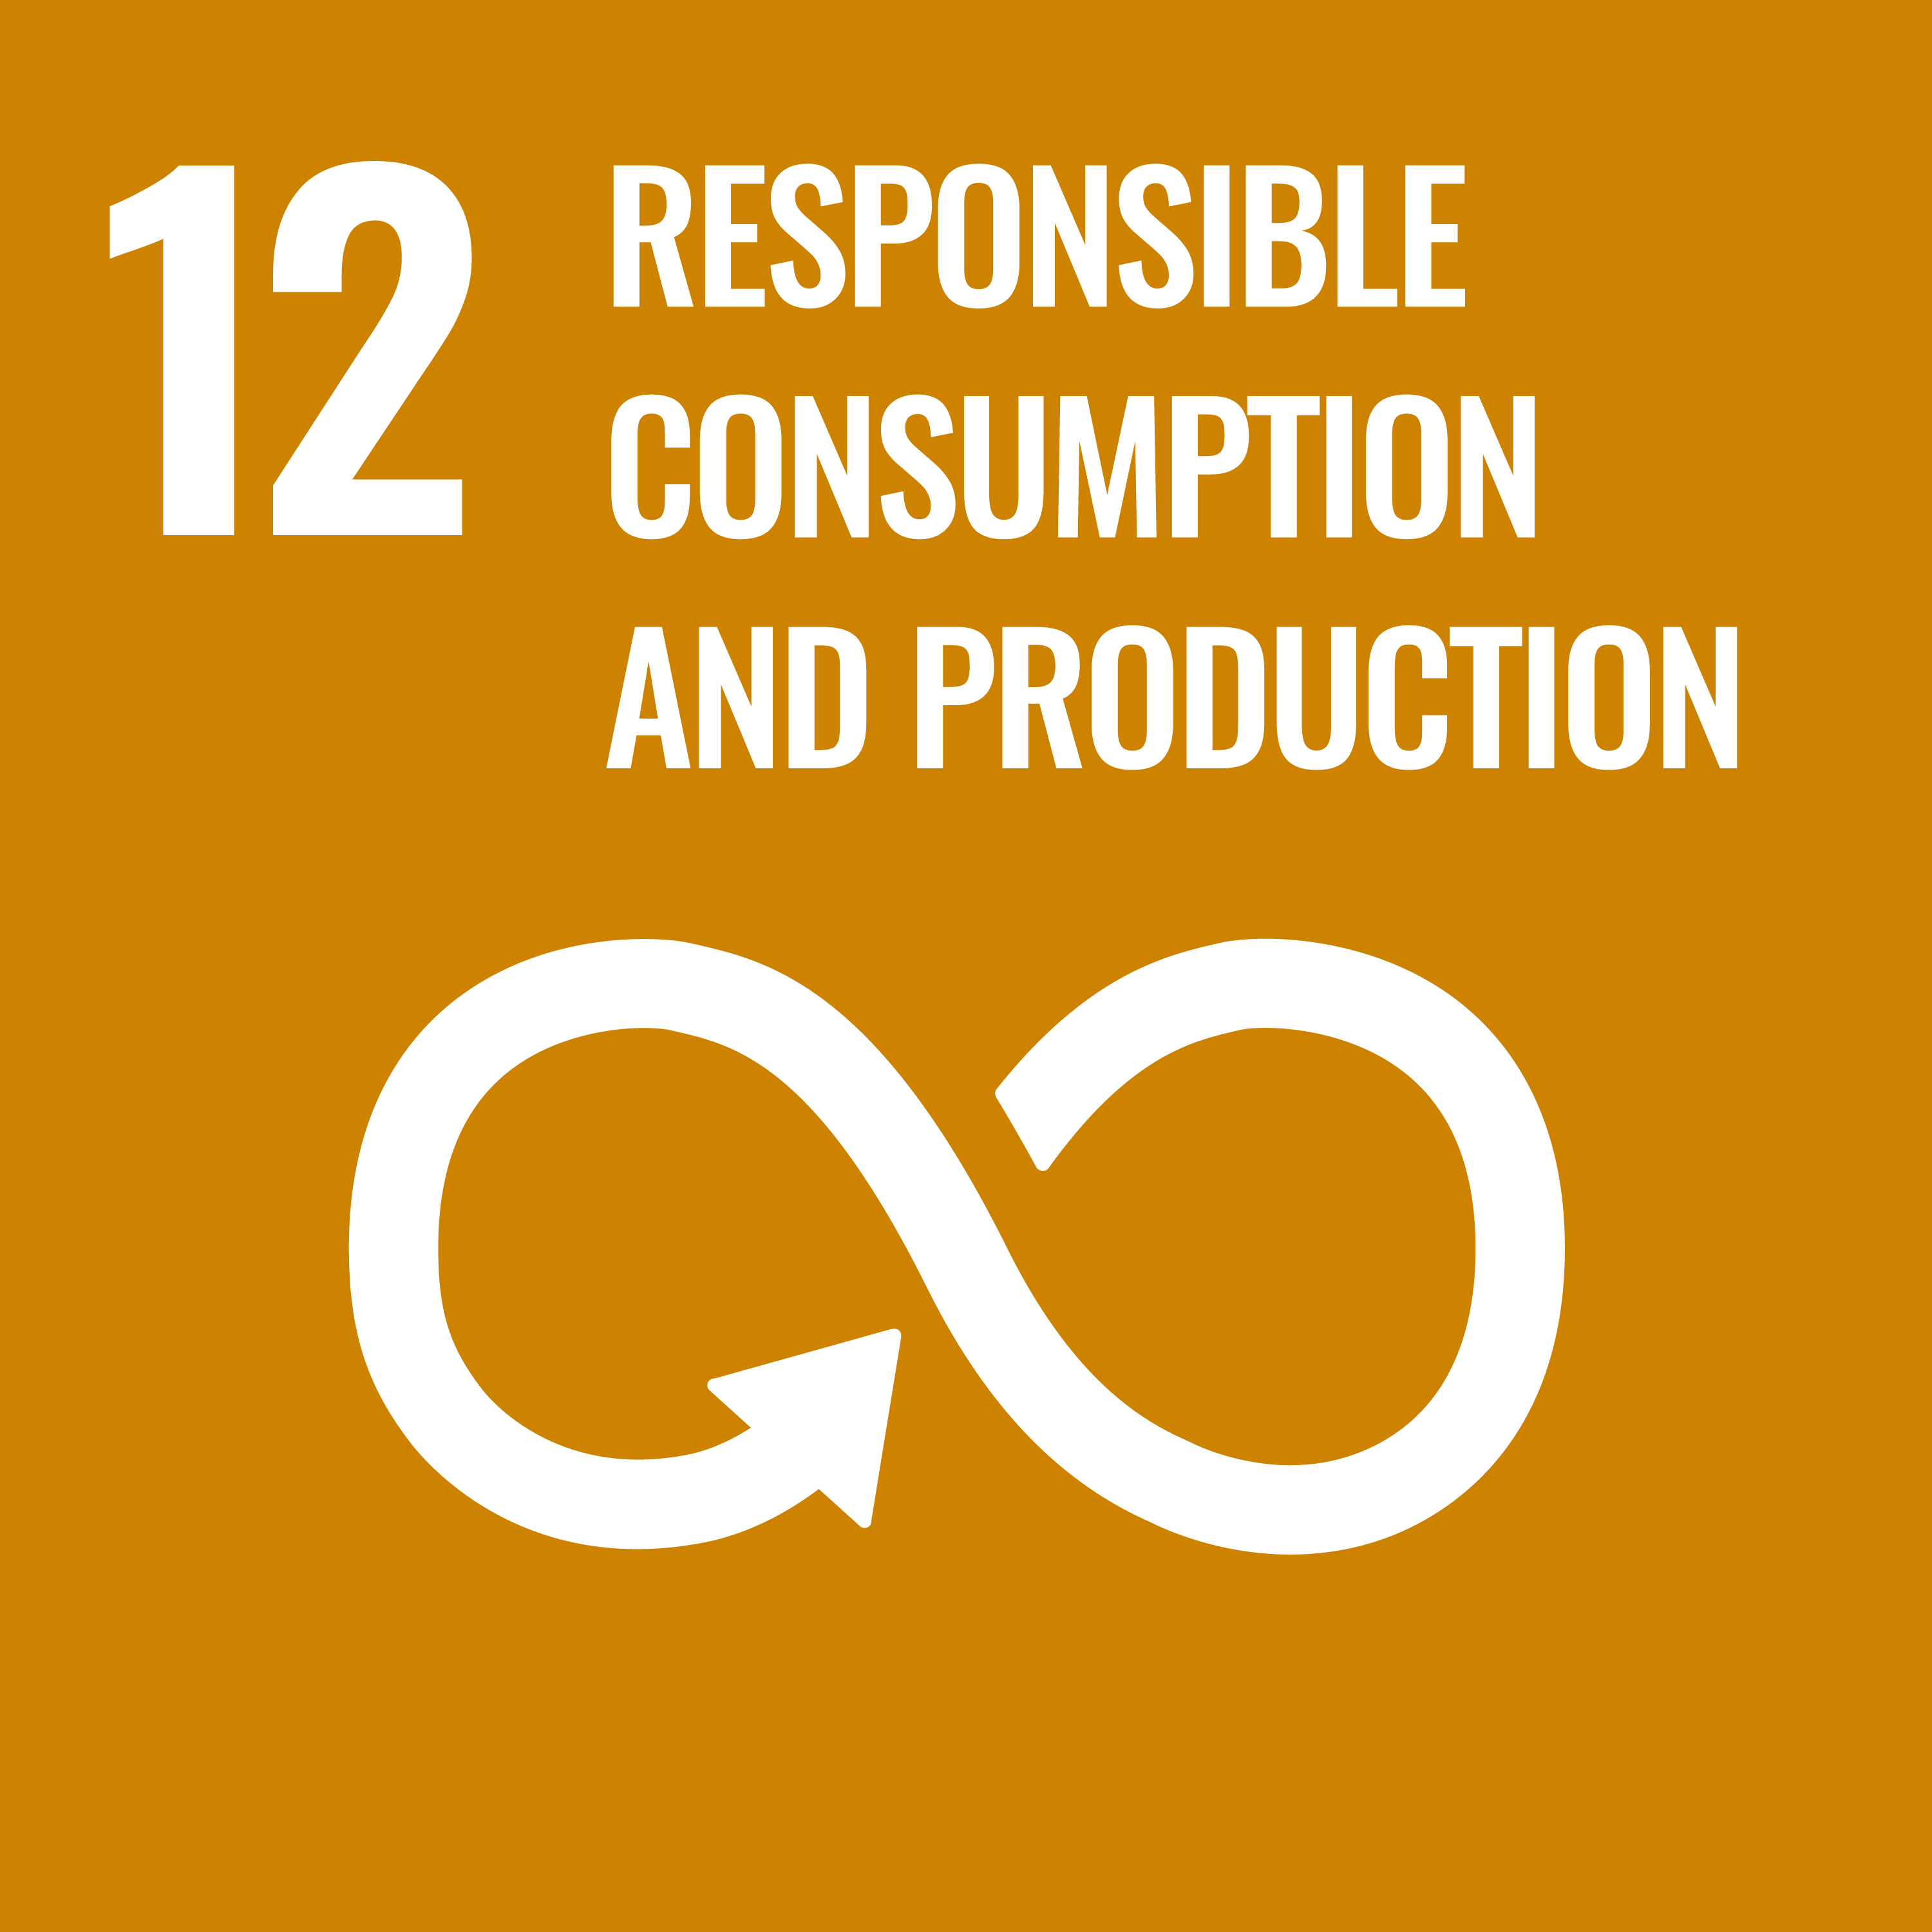 Our contribution to SDG 12